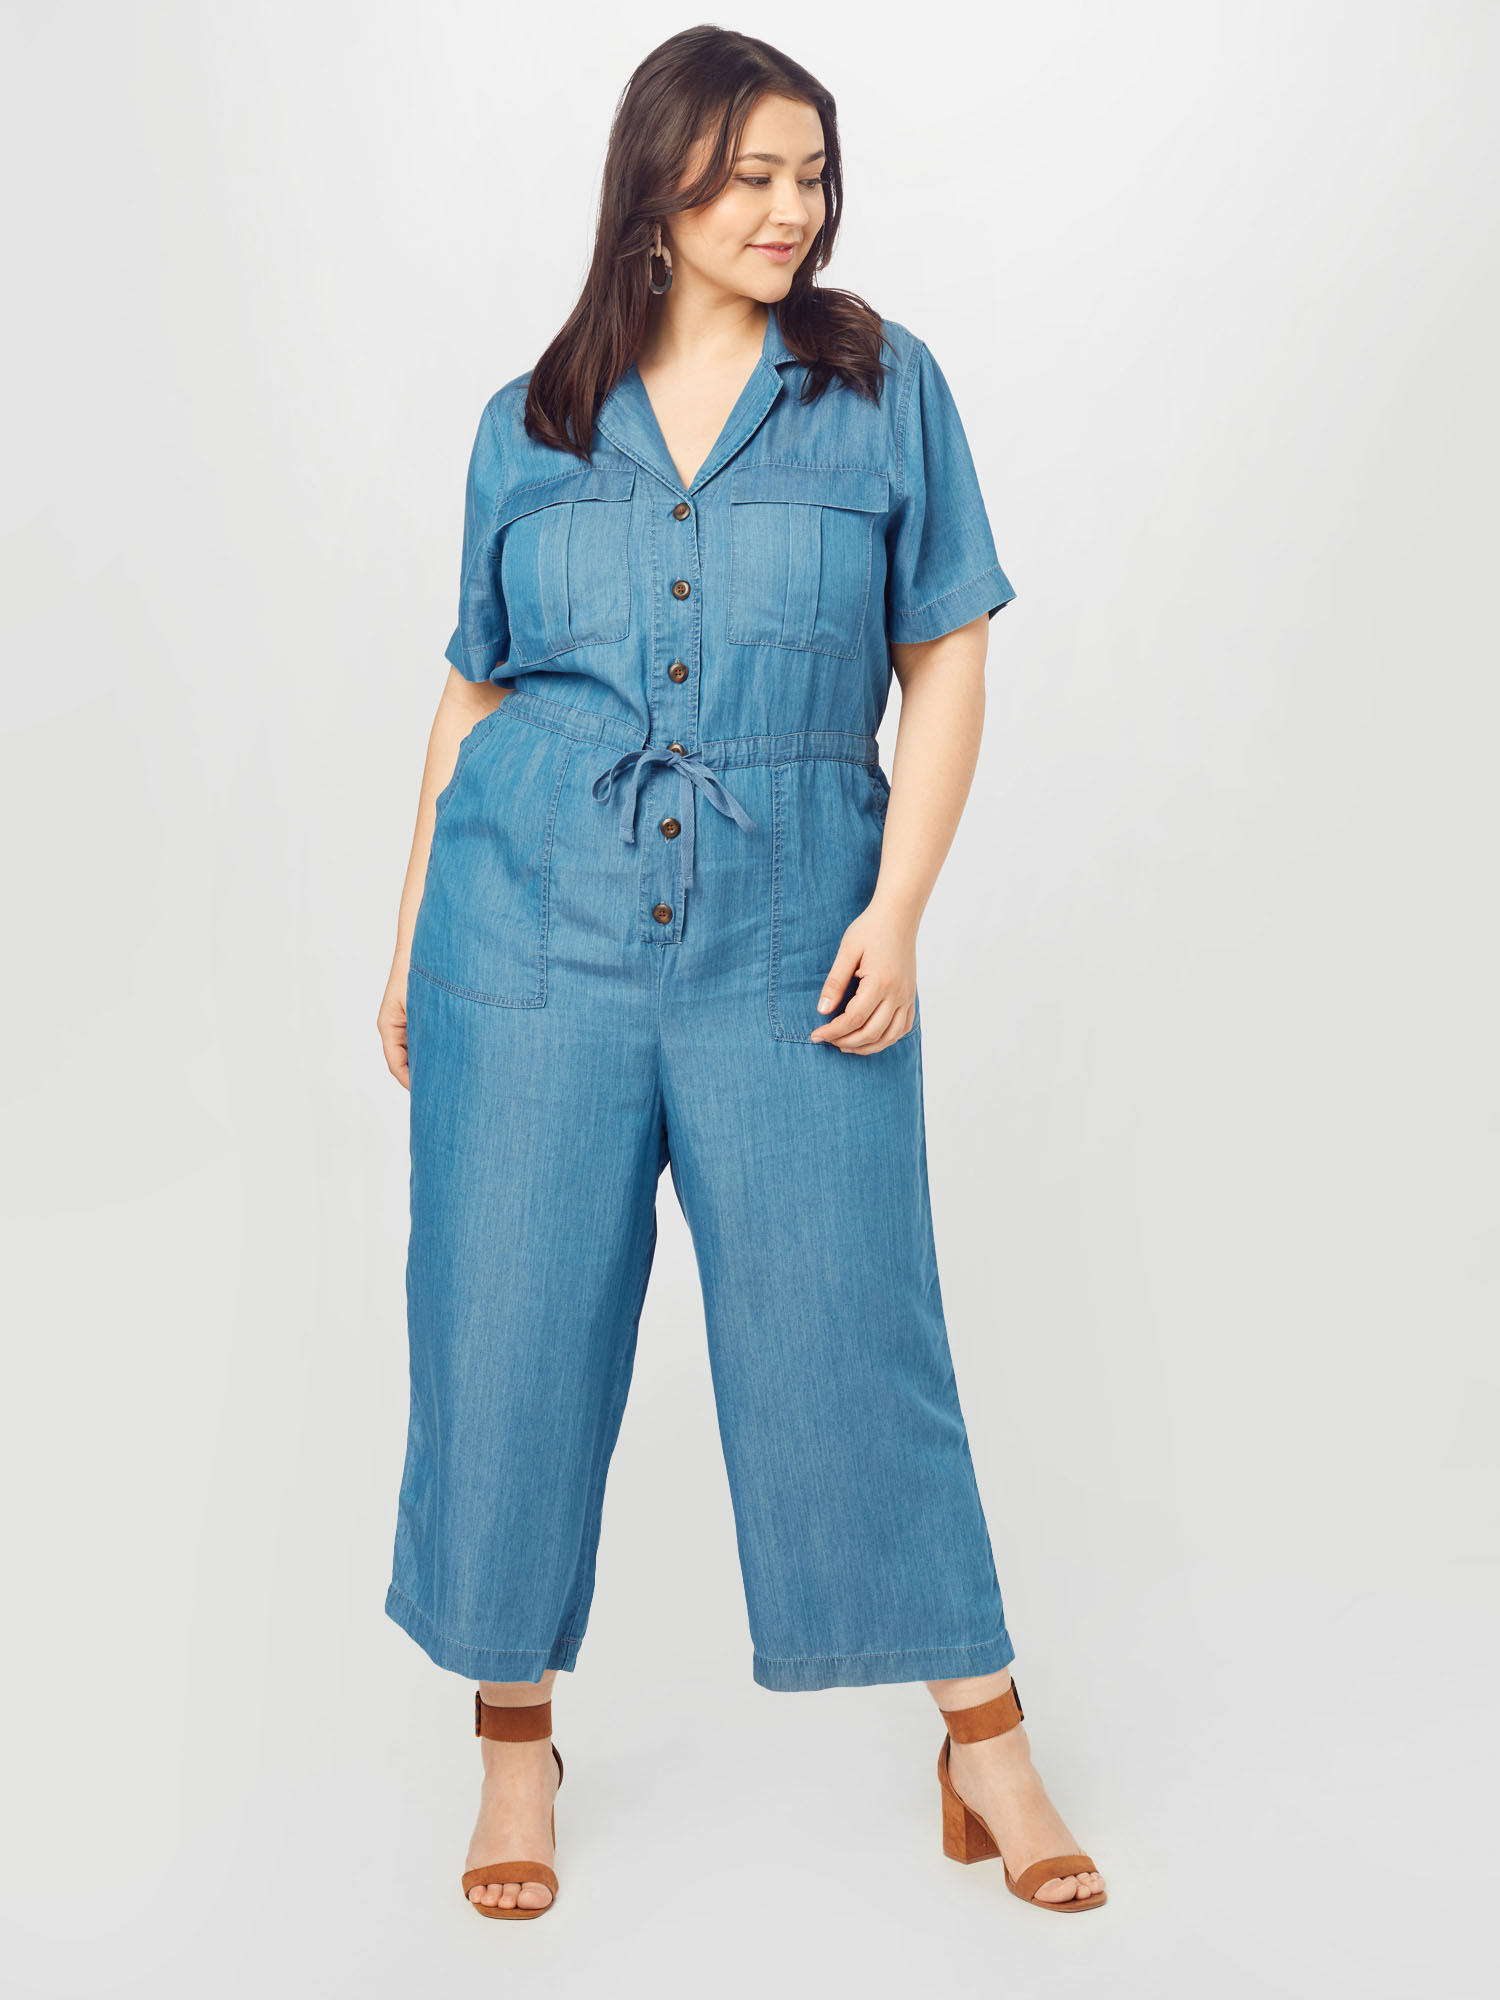 1okky Donna Rock Your Curves by Angelina K. Tuta jumpsuit in Blu 